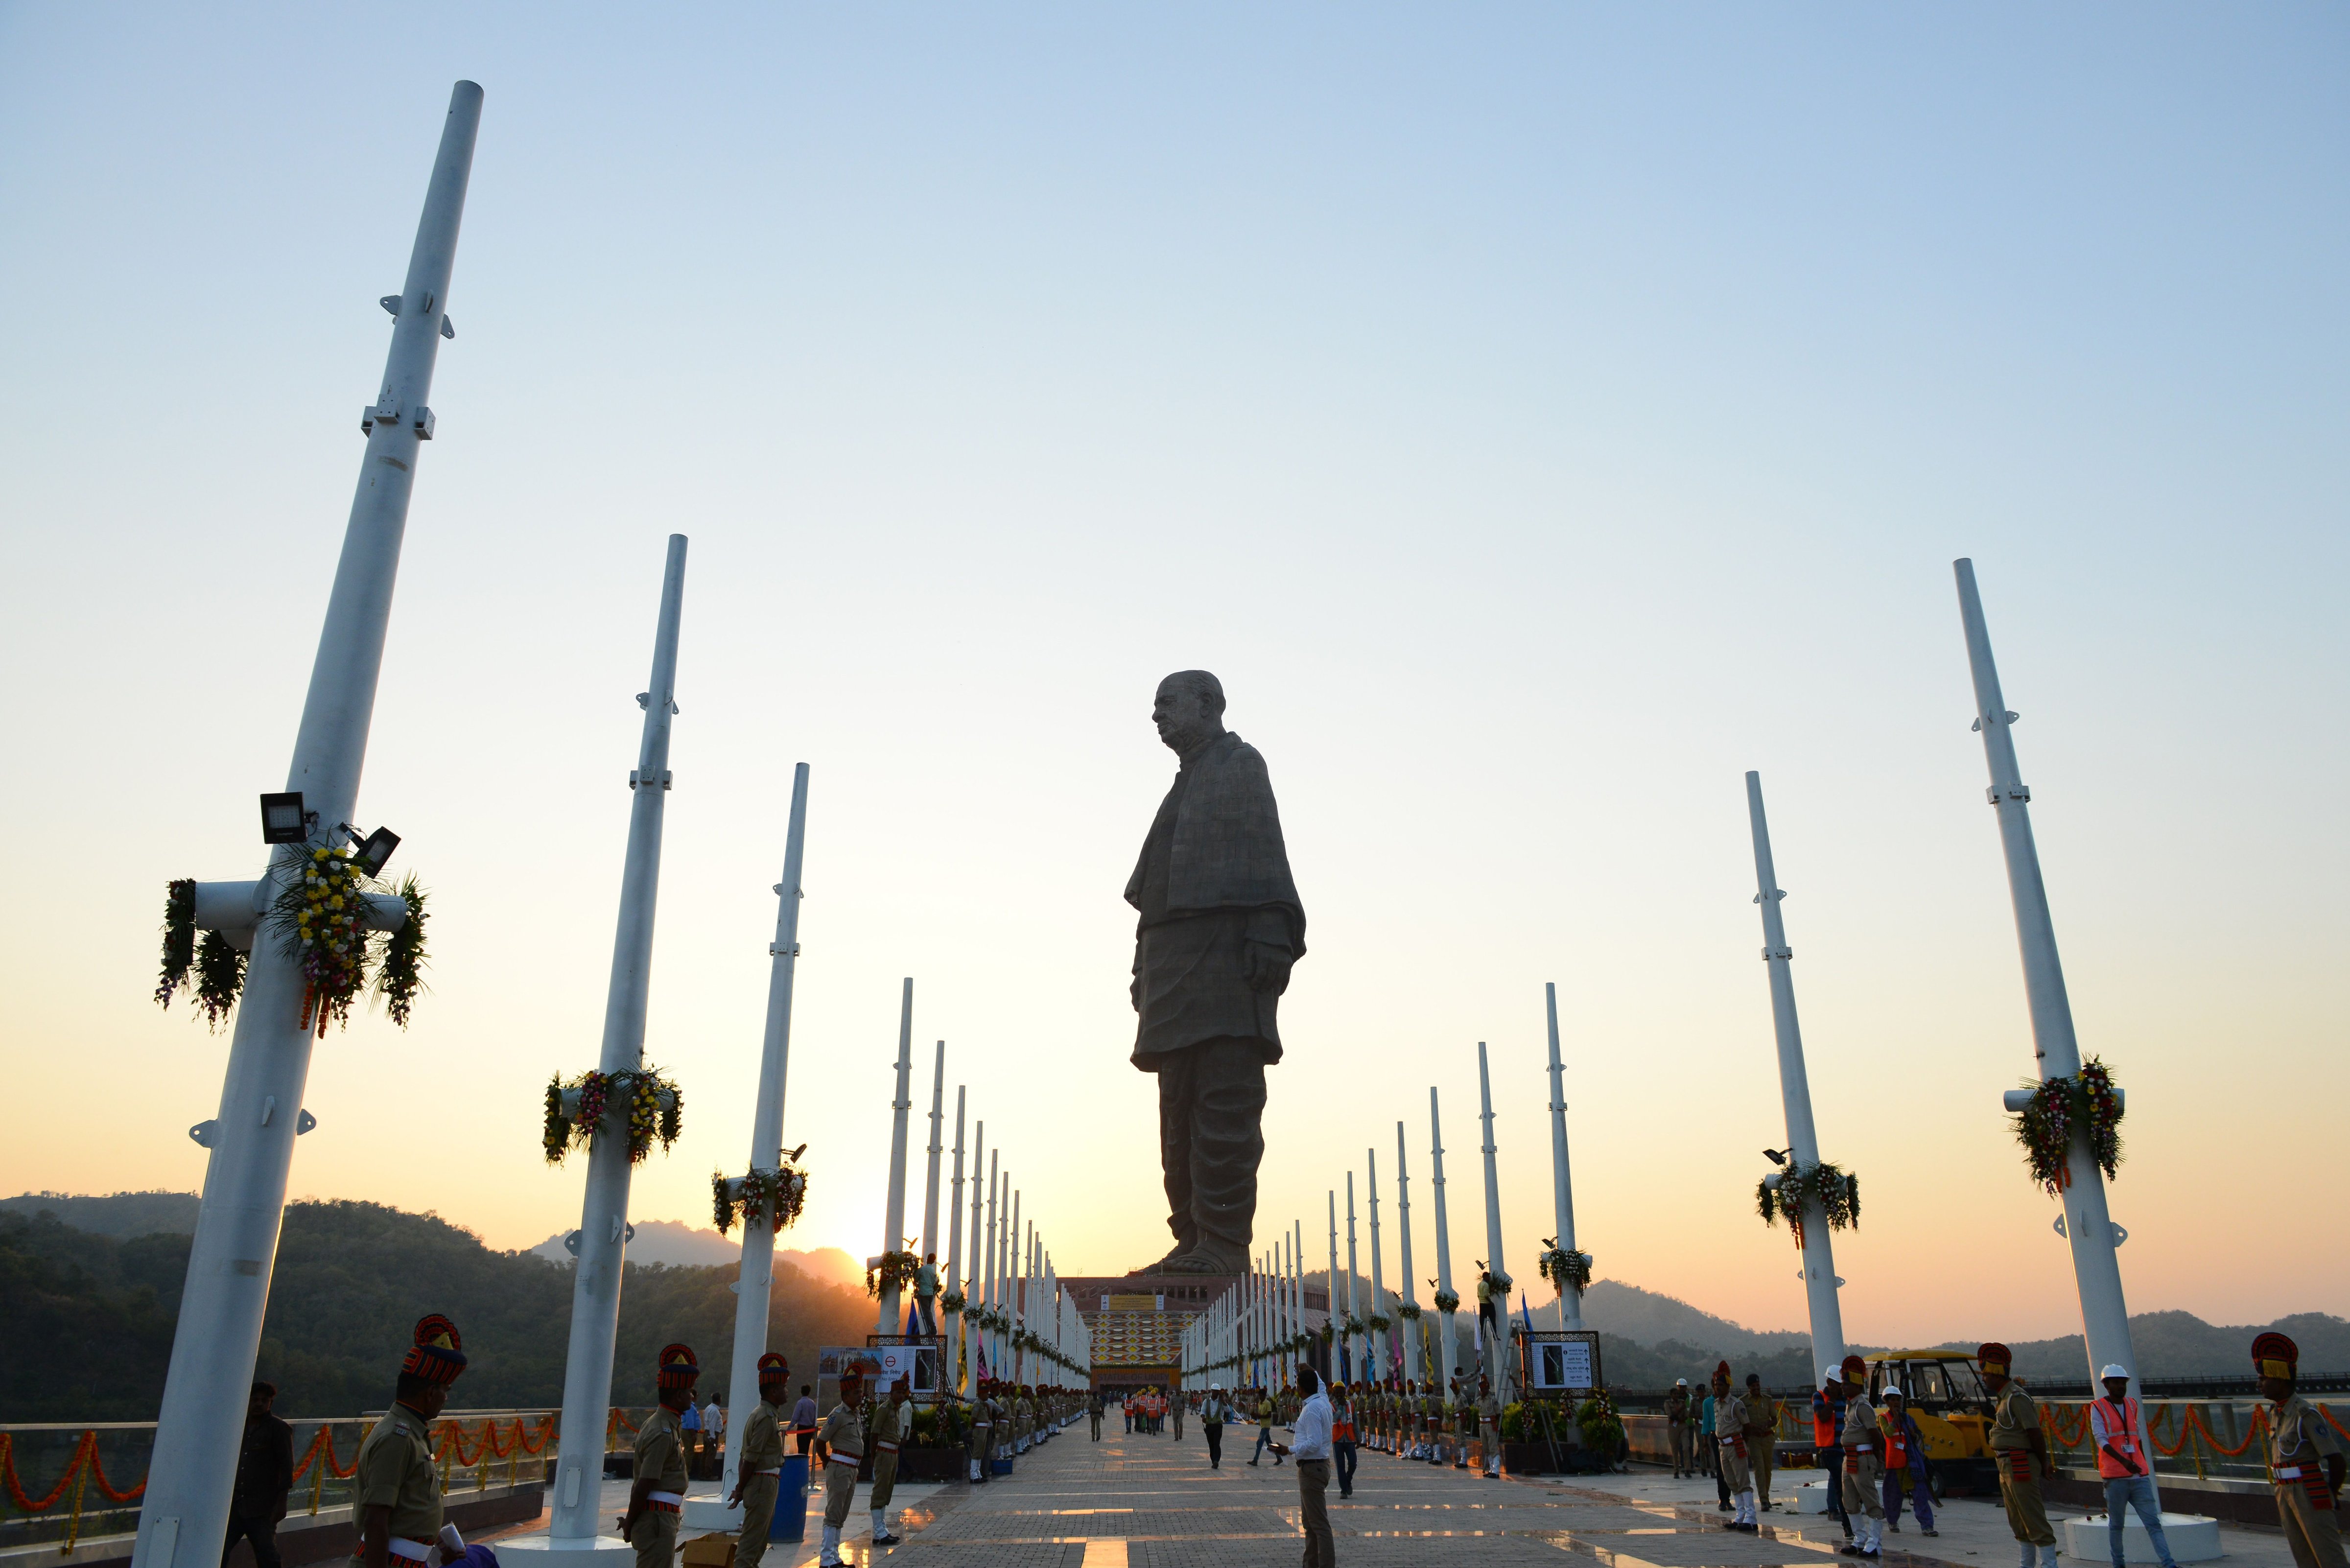 Indian policemen stand guard near the "Statue Of Unity," the world's tallest statue dedicated to Indian independence leader Sardar Vallabhbhai Patel, near Vadodara in India's western Gujarat state on October 31, 2018. (SAM PANTHAKY-AFP/Getty Images)